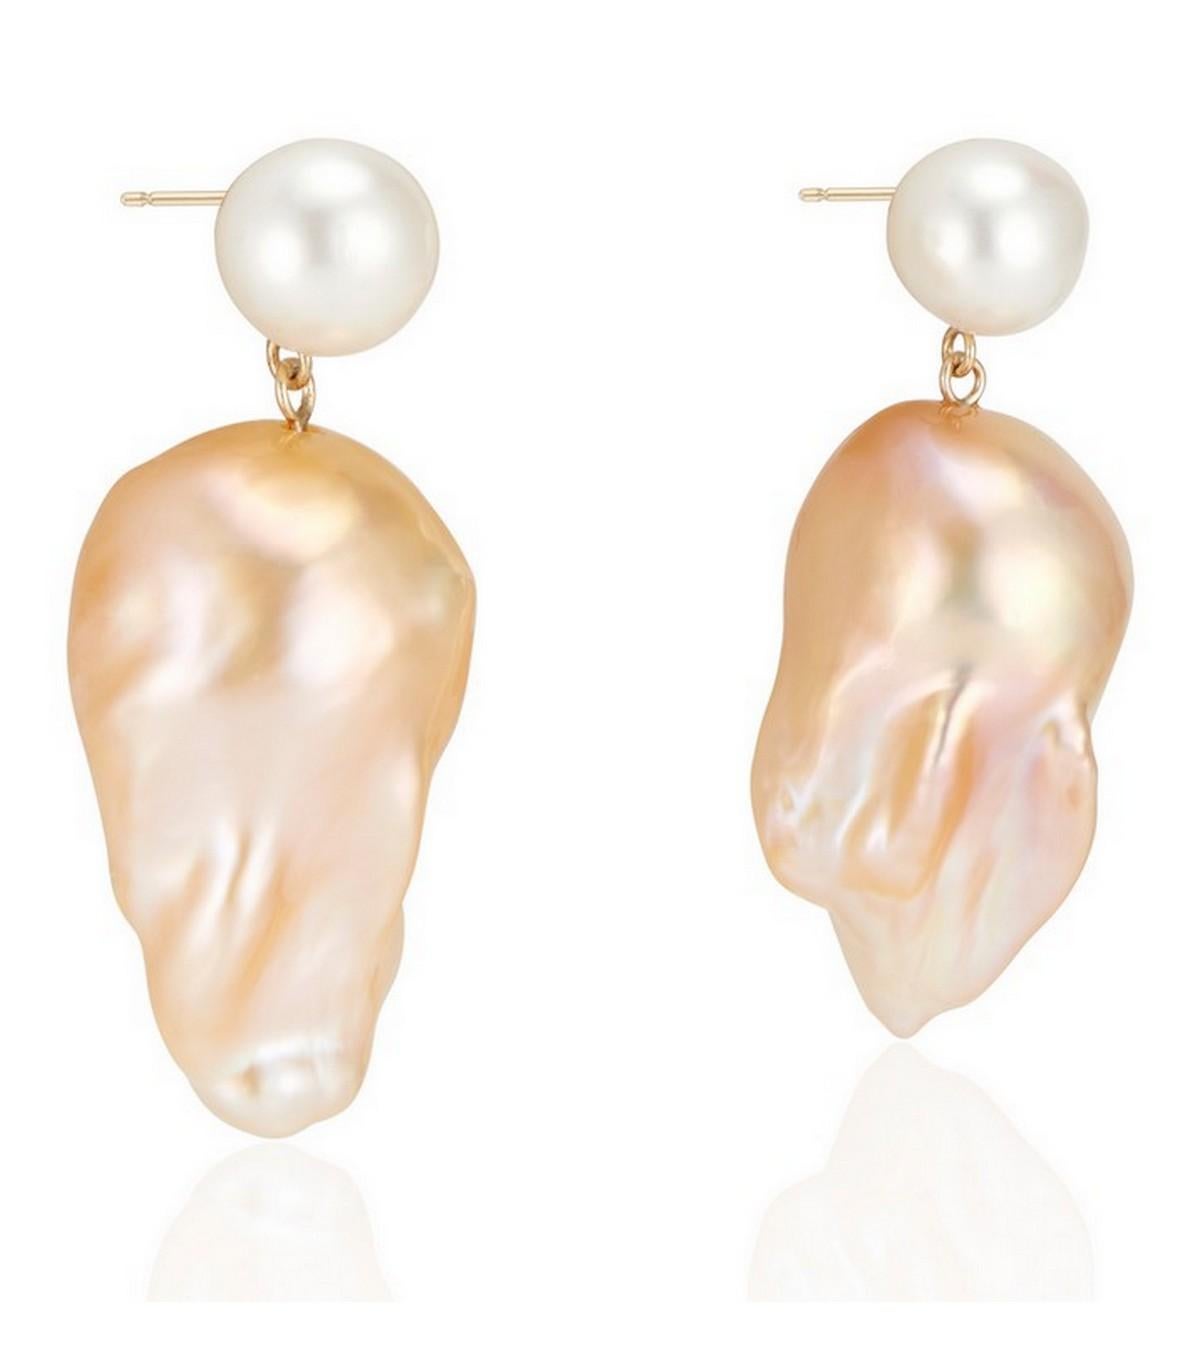 One of our favorites of our new collection, these Double Bubble earrings feature an 8- 8.5 mm white freshwater round pearl with a natural golden hue freshwater baroque pearl set on 14k Yellow gold post.

Make a statement with these unique golden